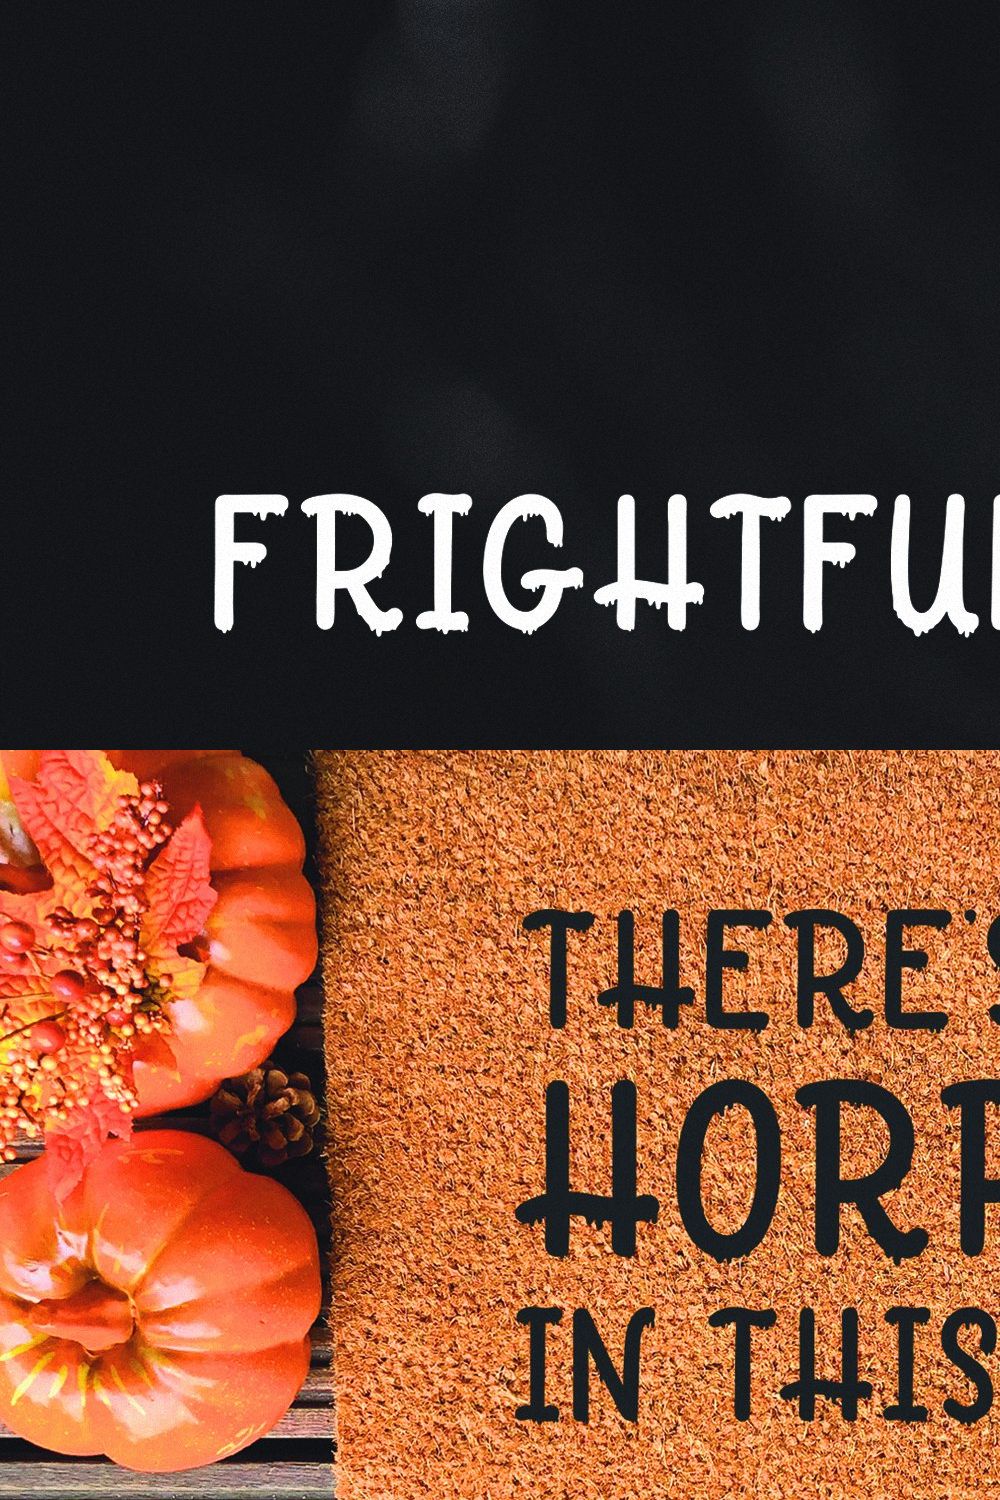 Frightful night - a Halloween font pinterest preview image.